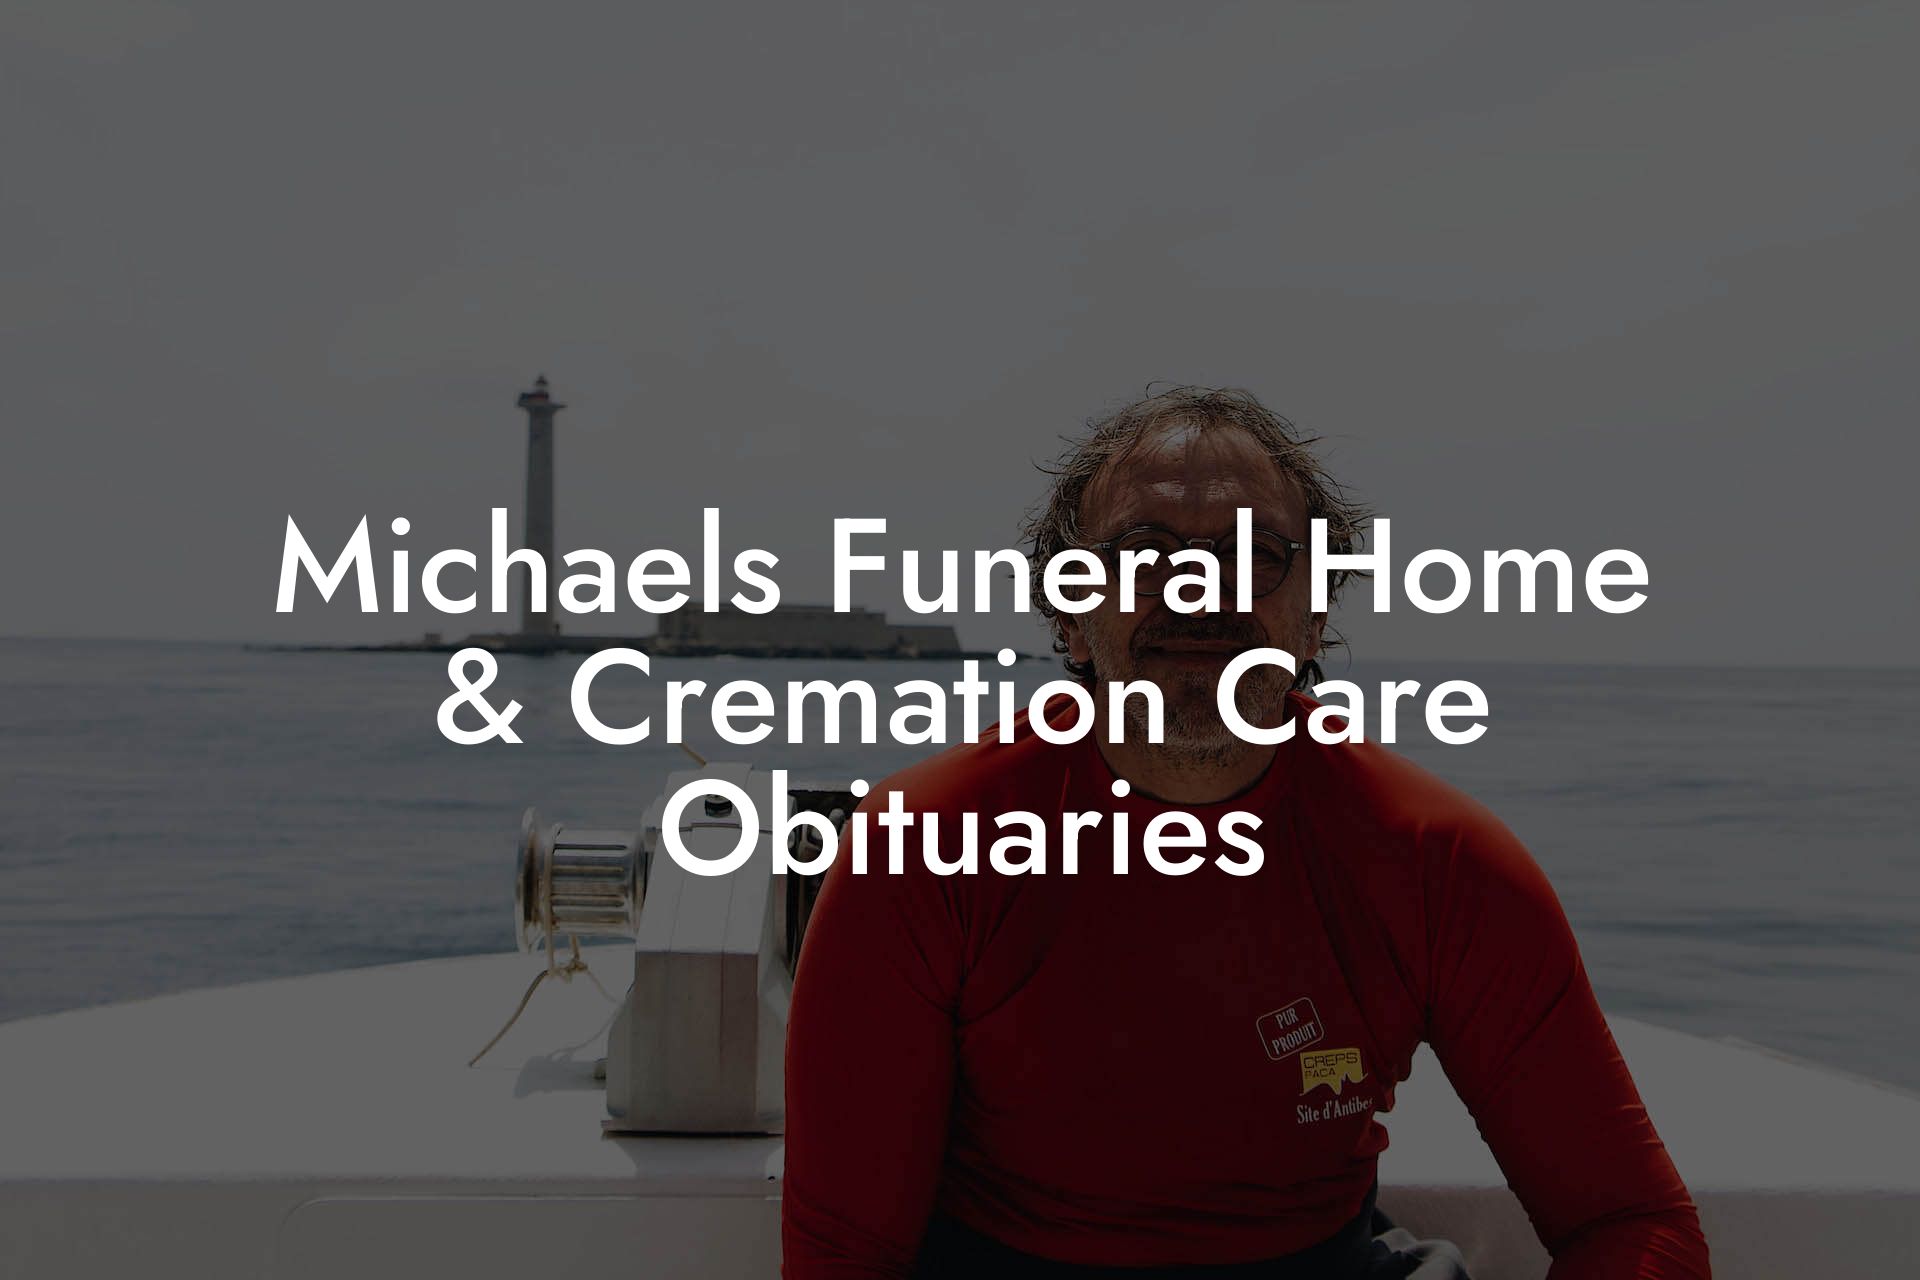 Michaels Funeral Home & Cremation Care Obituaries